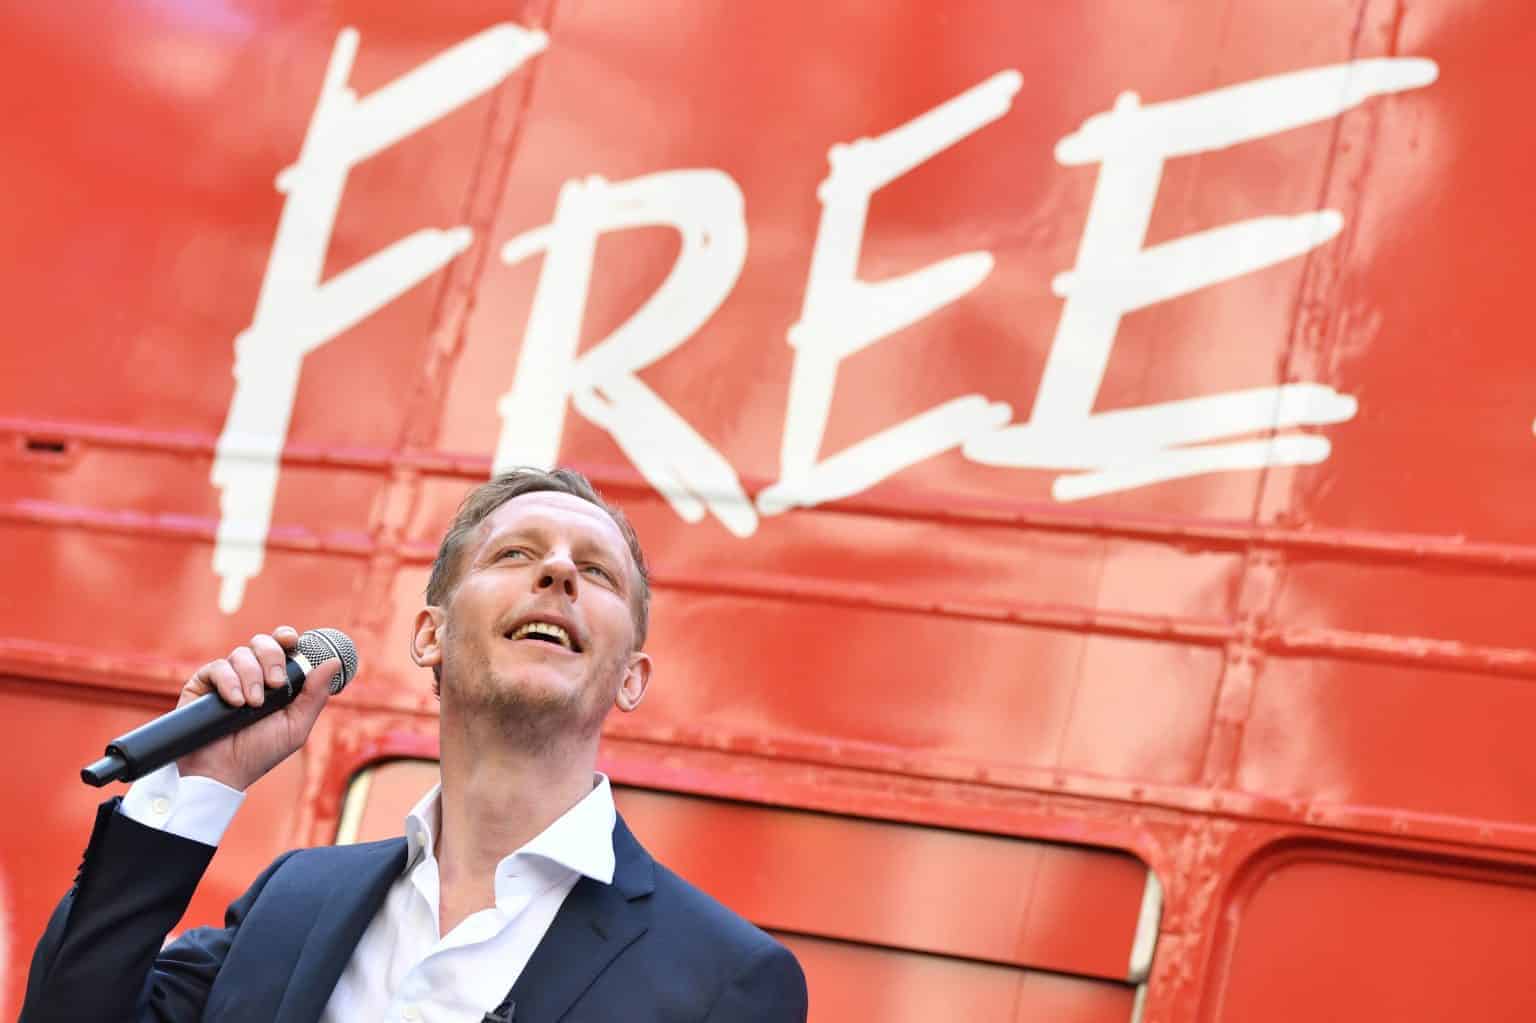 Laurence Fox says ‘the virus is in your mind’. Twitter disagrees